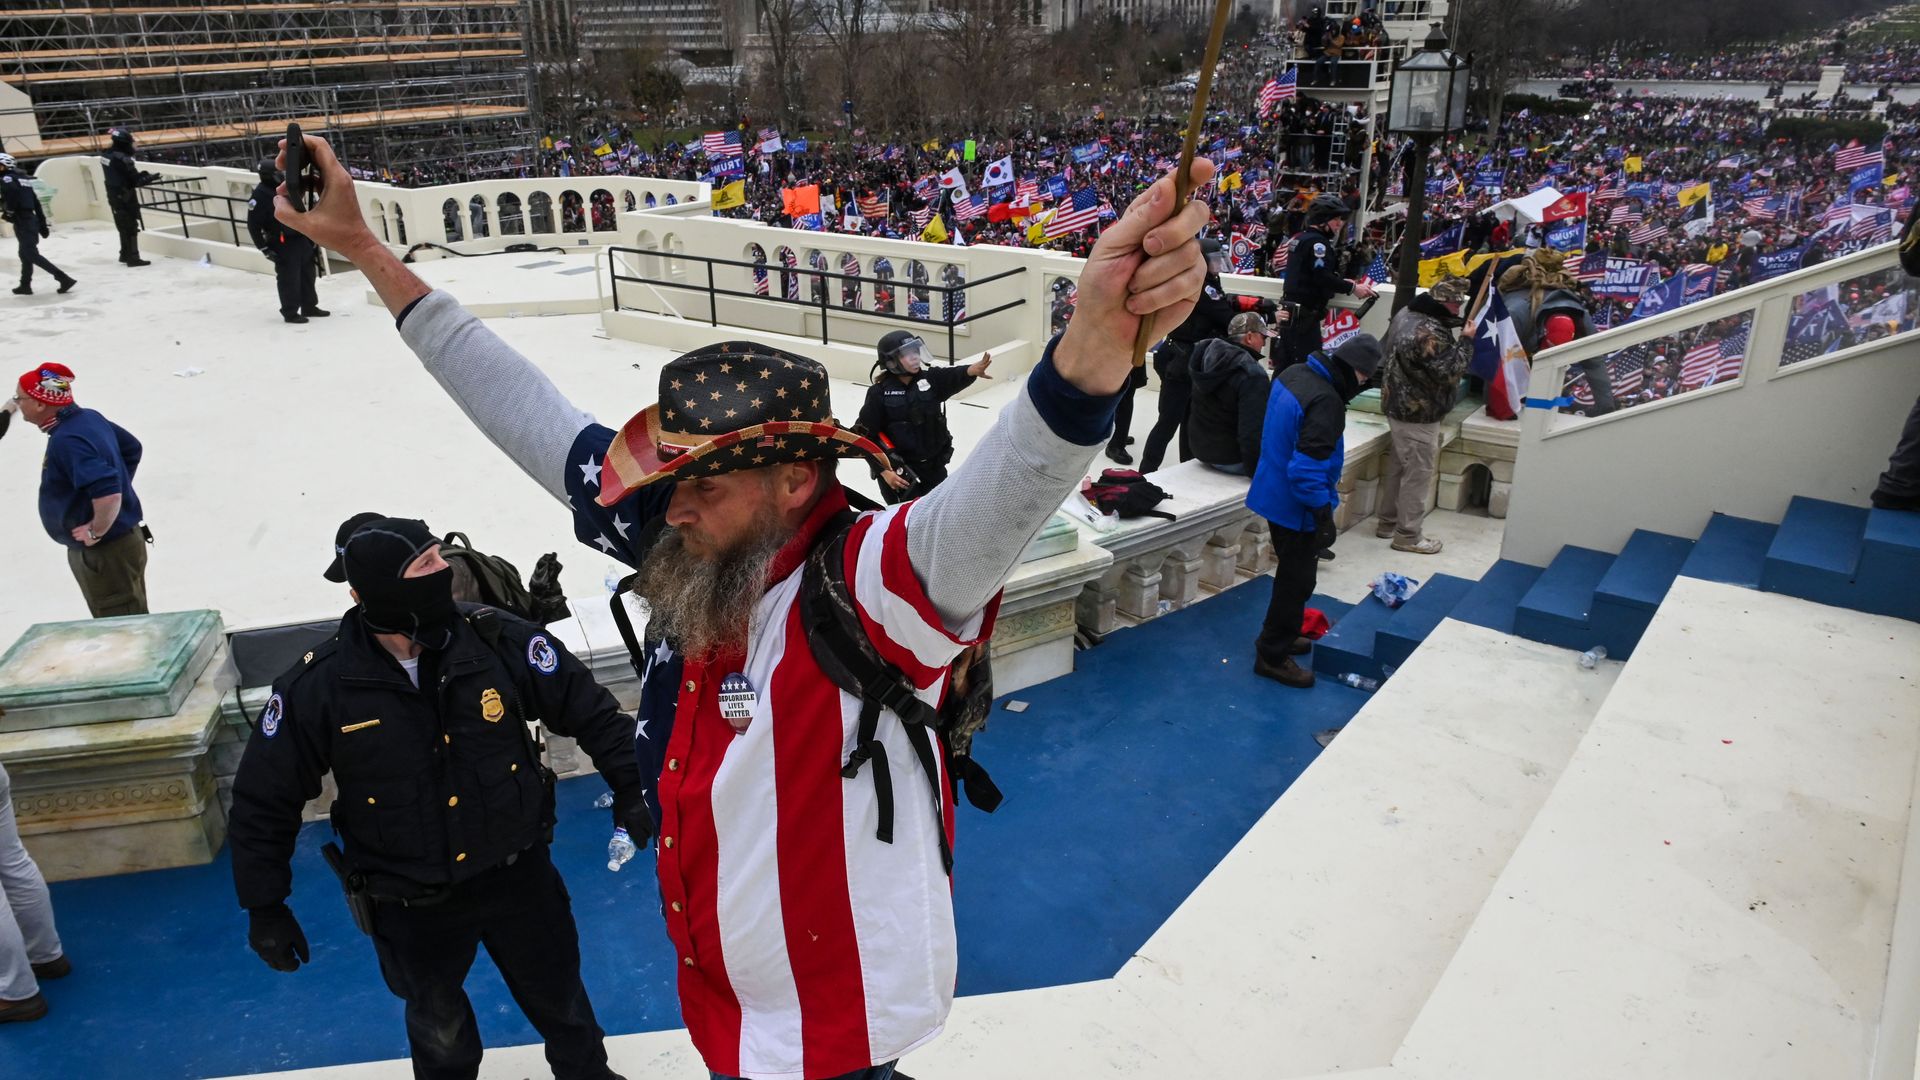 A rioter is seen flashing peace signs as he stands atop the inaugural platform during Wednesday's breach at the U.S. Capitol.